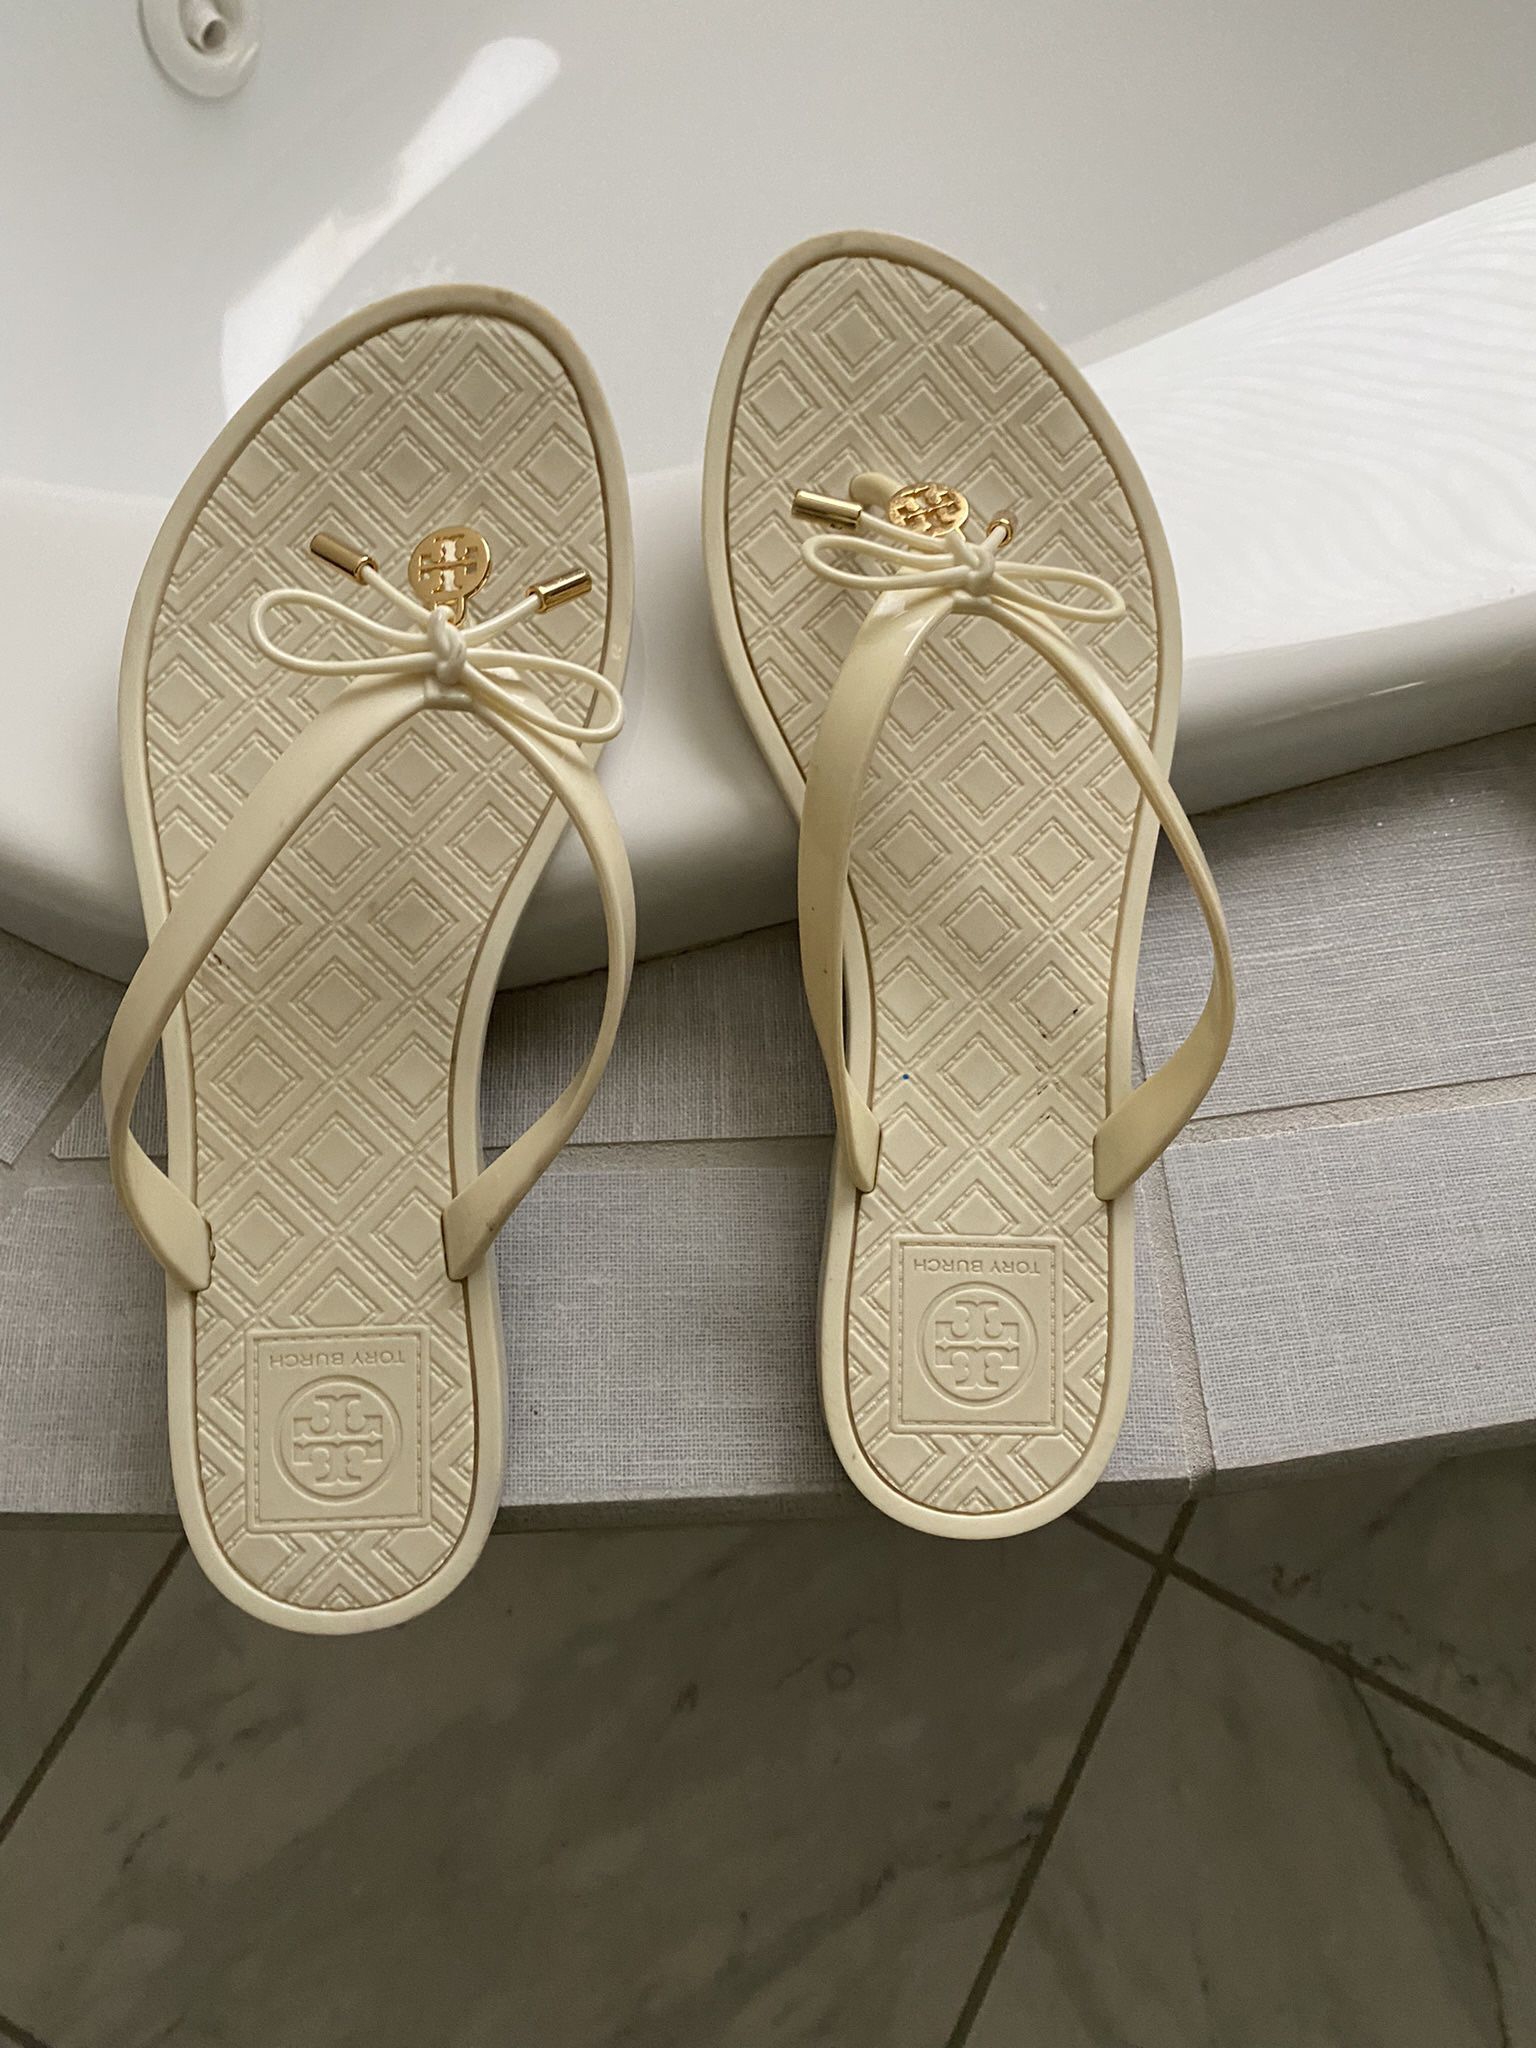 Tory Burch Sandals for Sale in Scottsdale, AZ - OfferUp